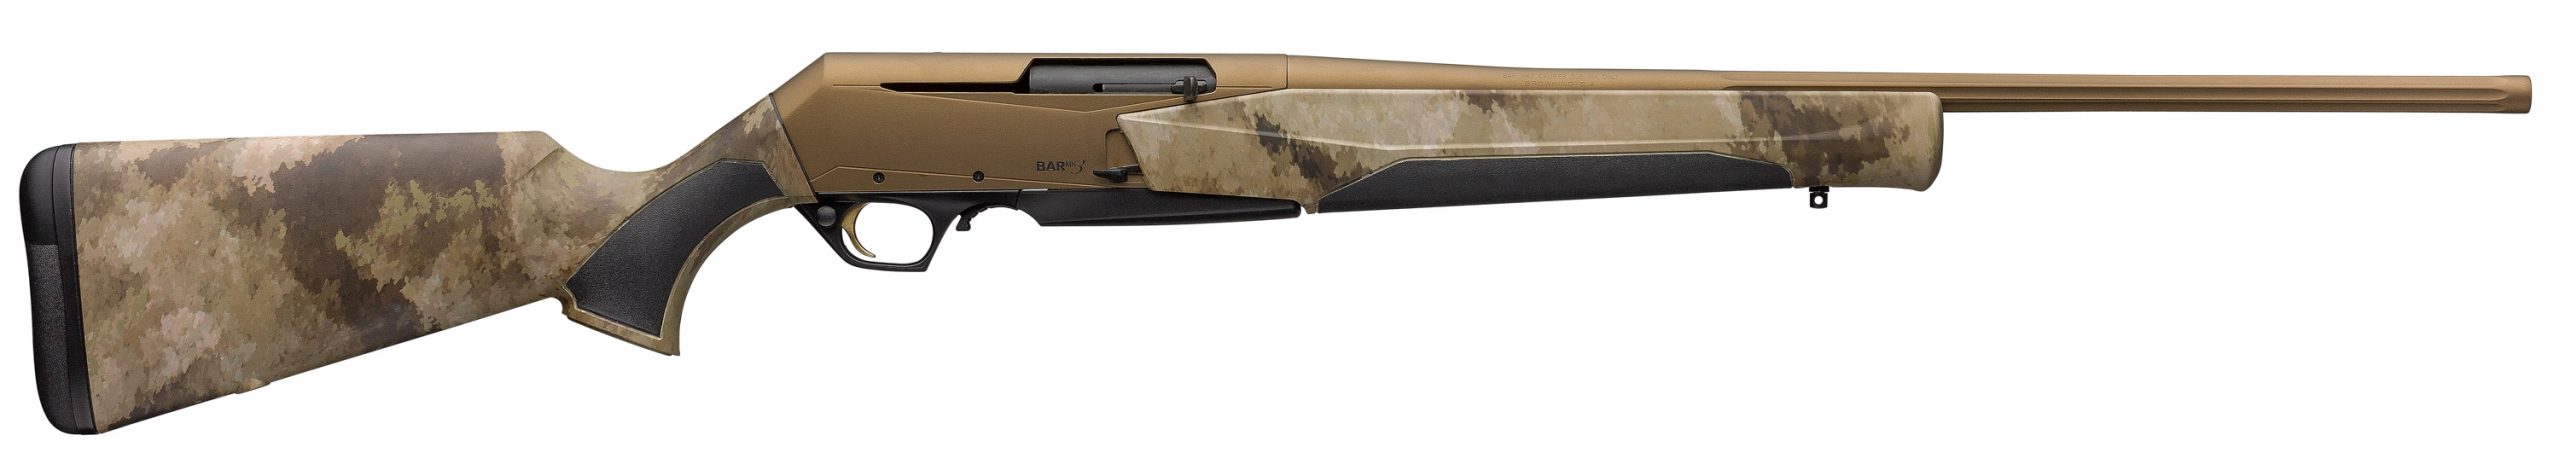 Browning Bar Mkiii Spd Ataca 270Win 22″ Hells Canyon Speed | A-Tacs Br031 064211 Scaled